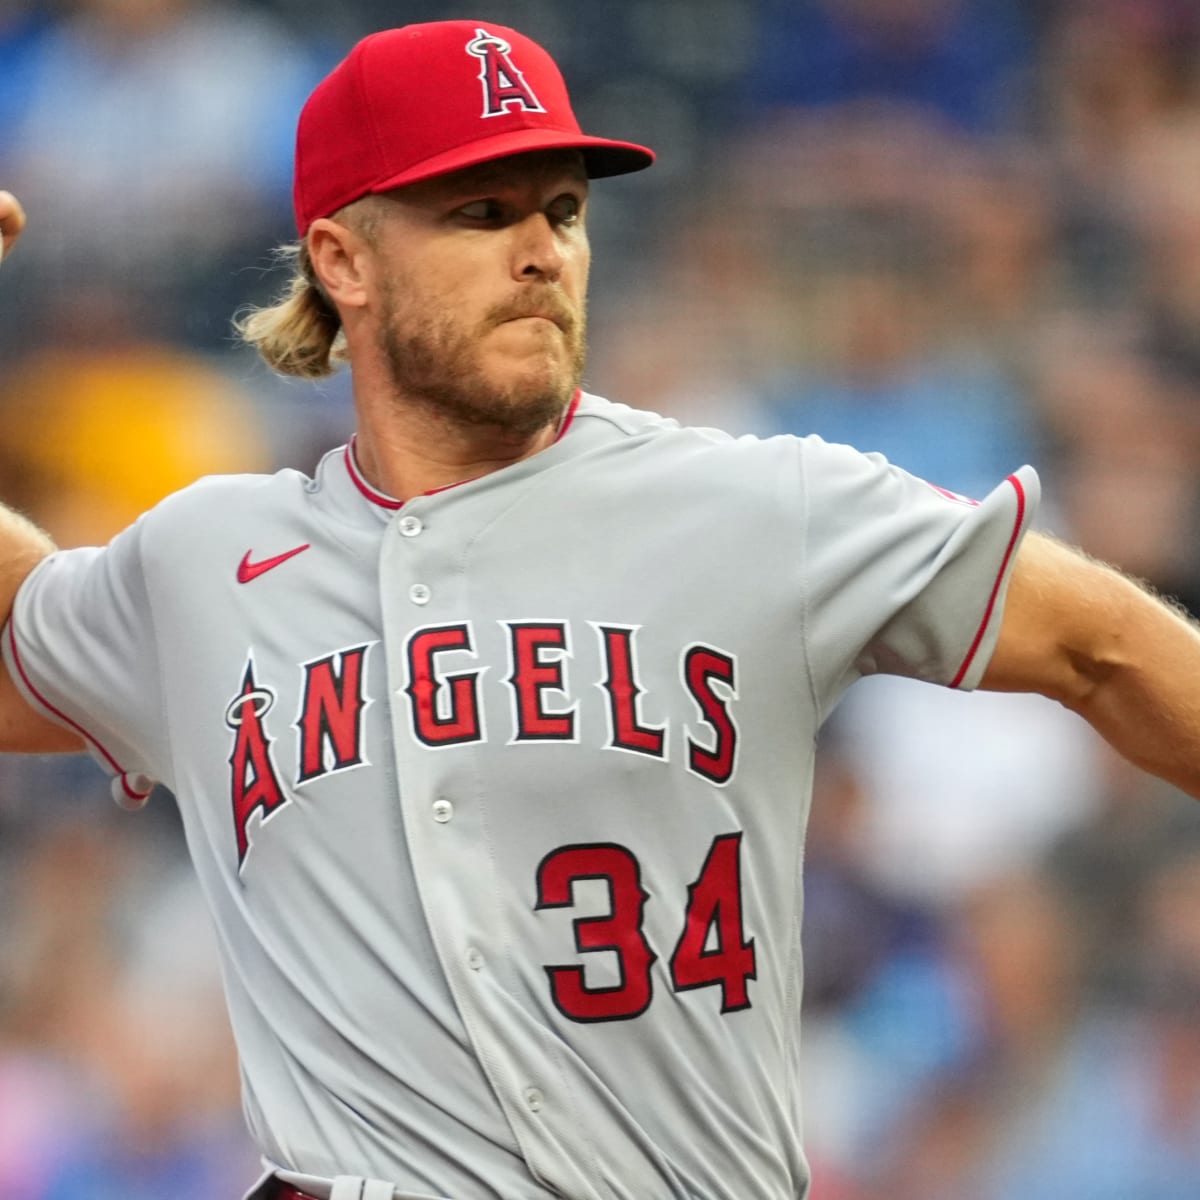 Phillies Acquire Angels Pitcher Noah Syndergaard, per Report